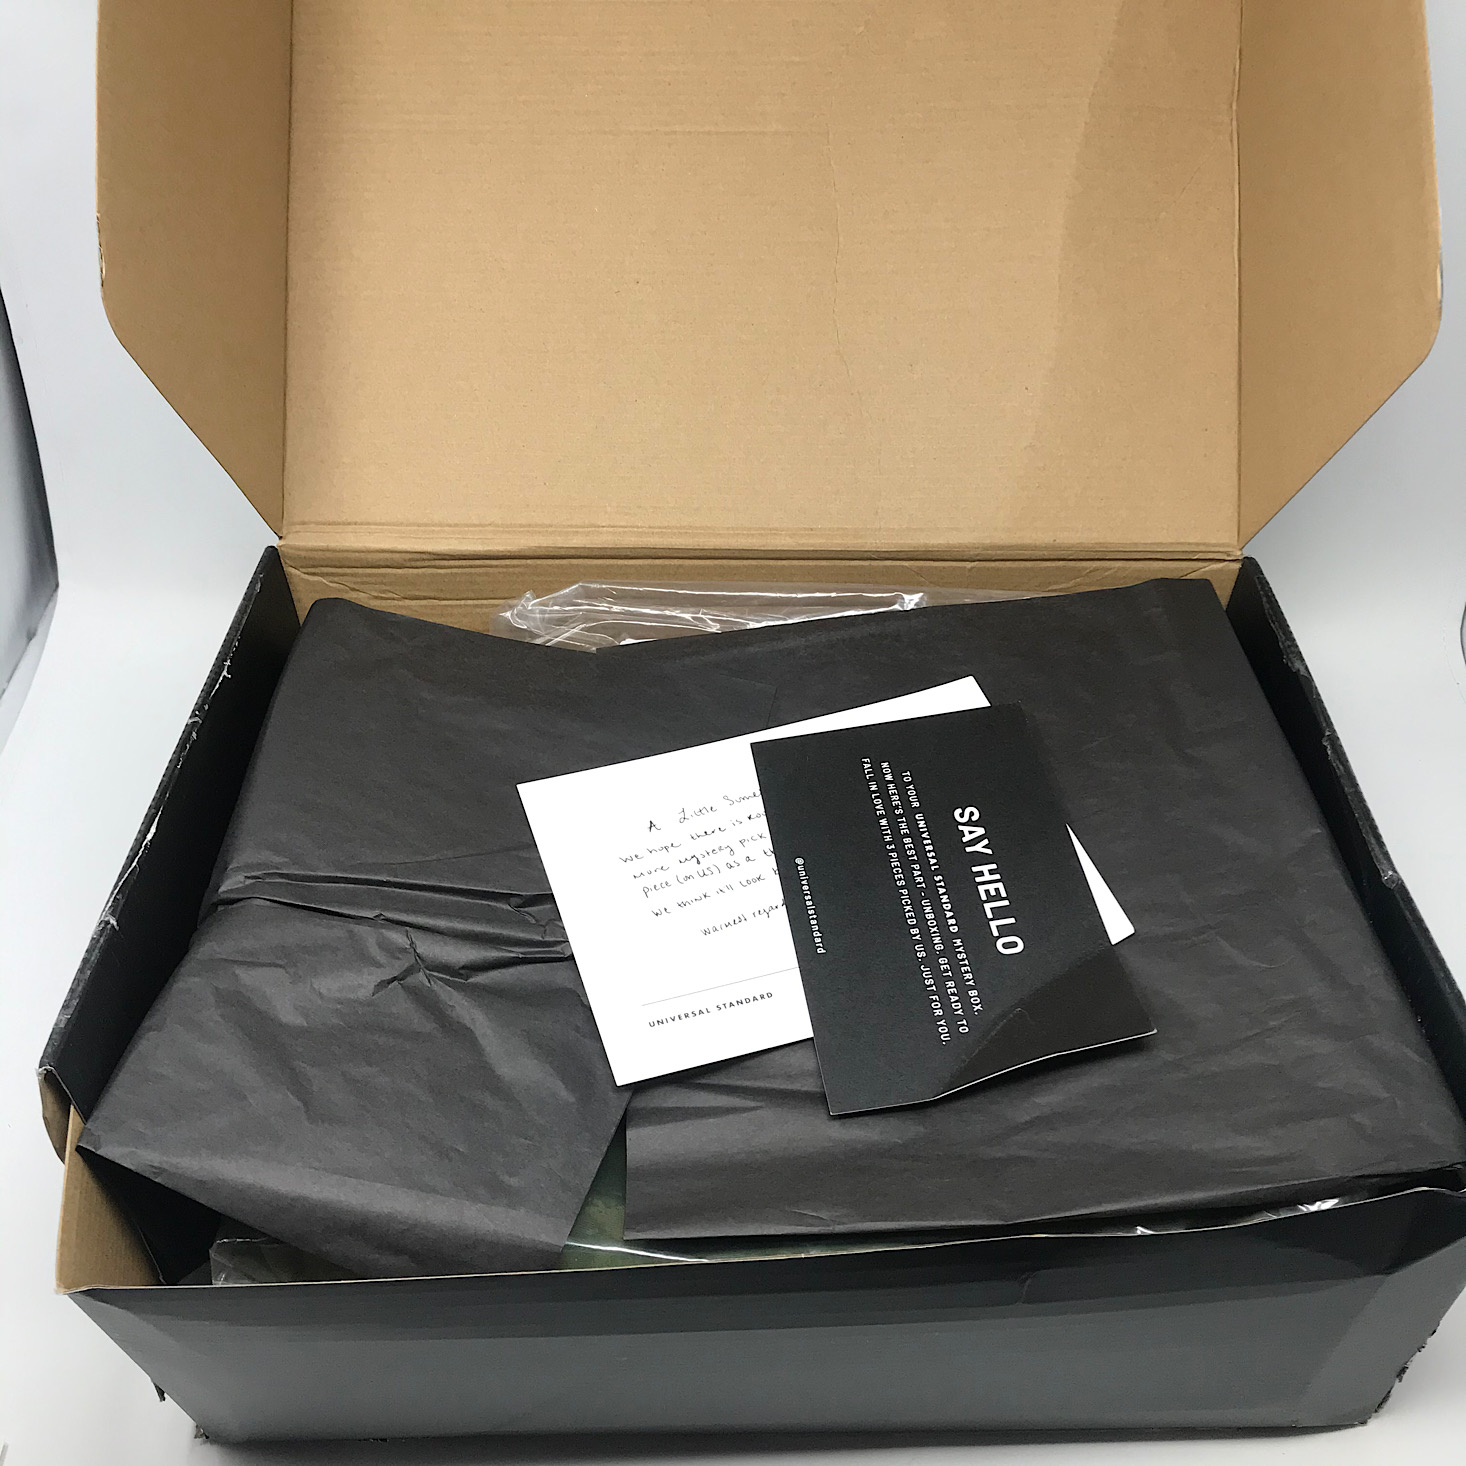 Universal Standard Classic Mystery Box Review – March 2020